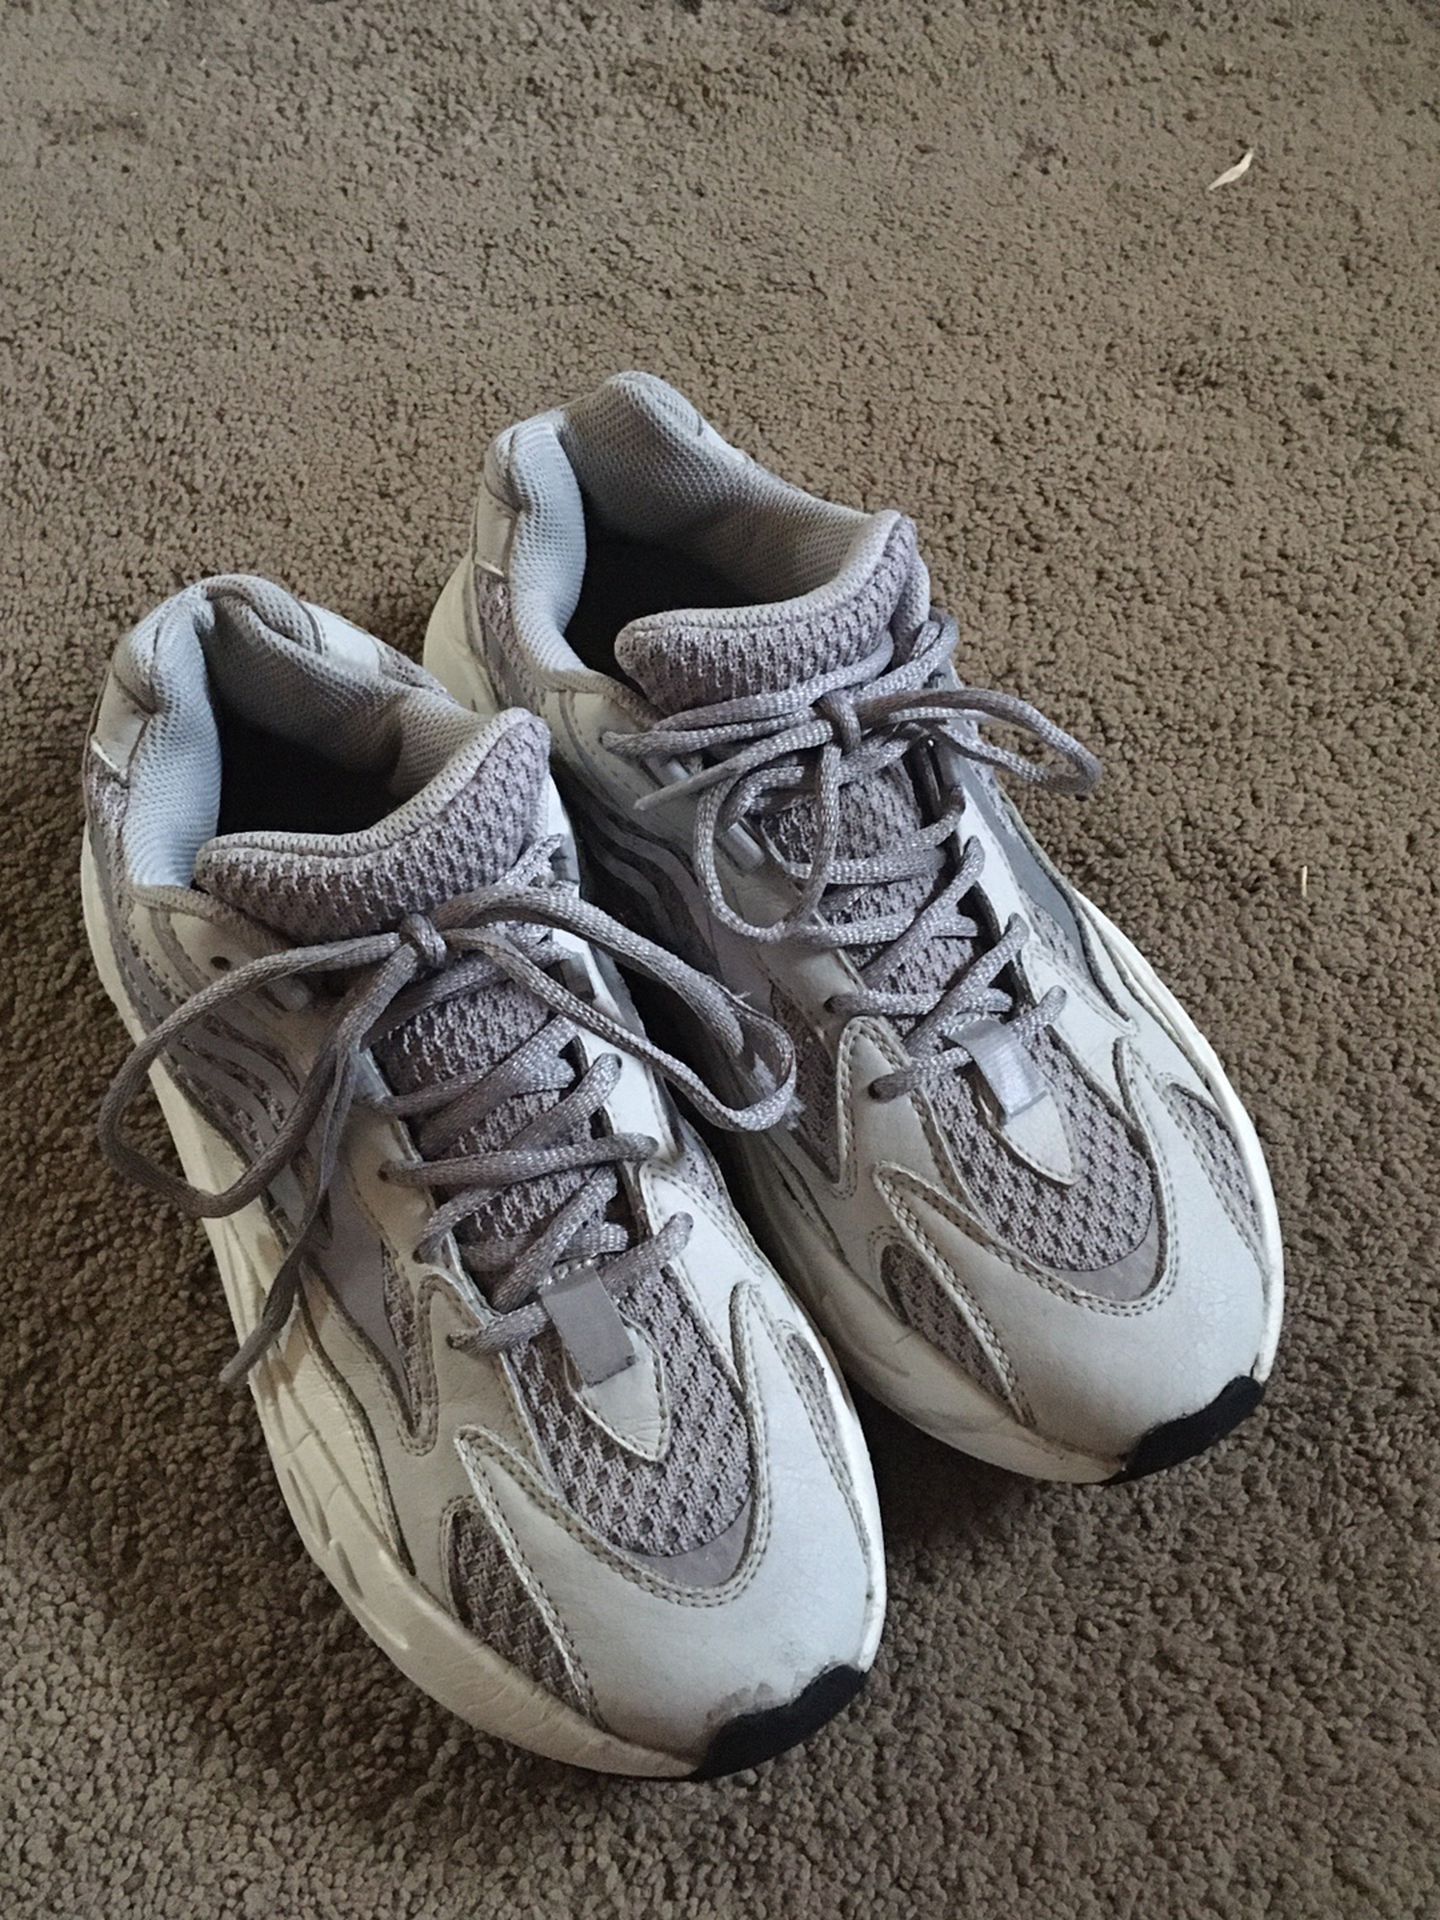 Adidas Yeezy Boost 700 V2 Static Color Way